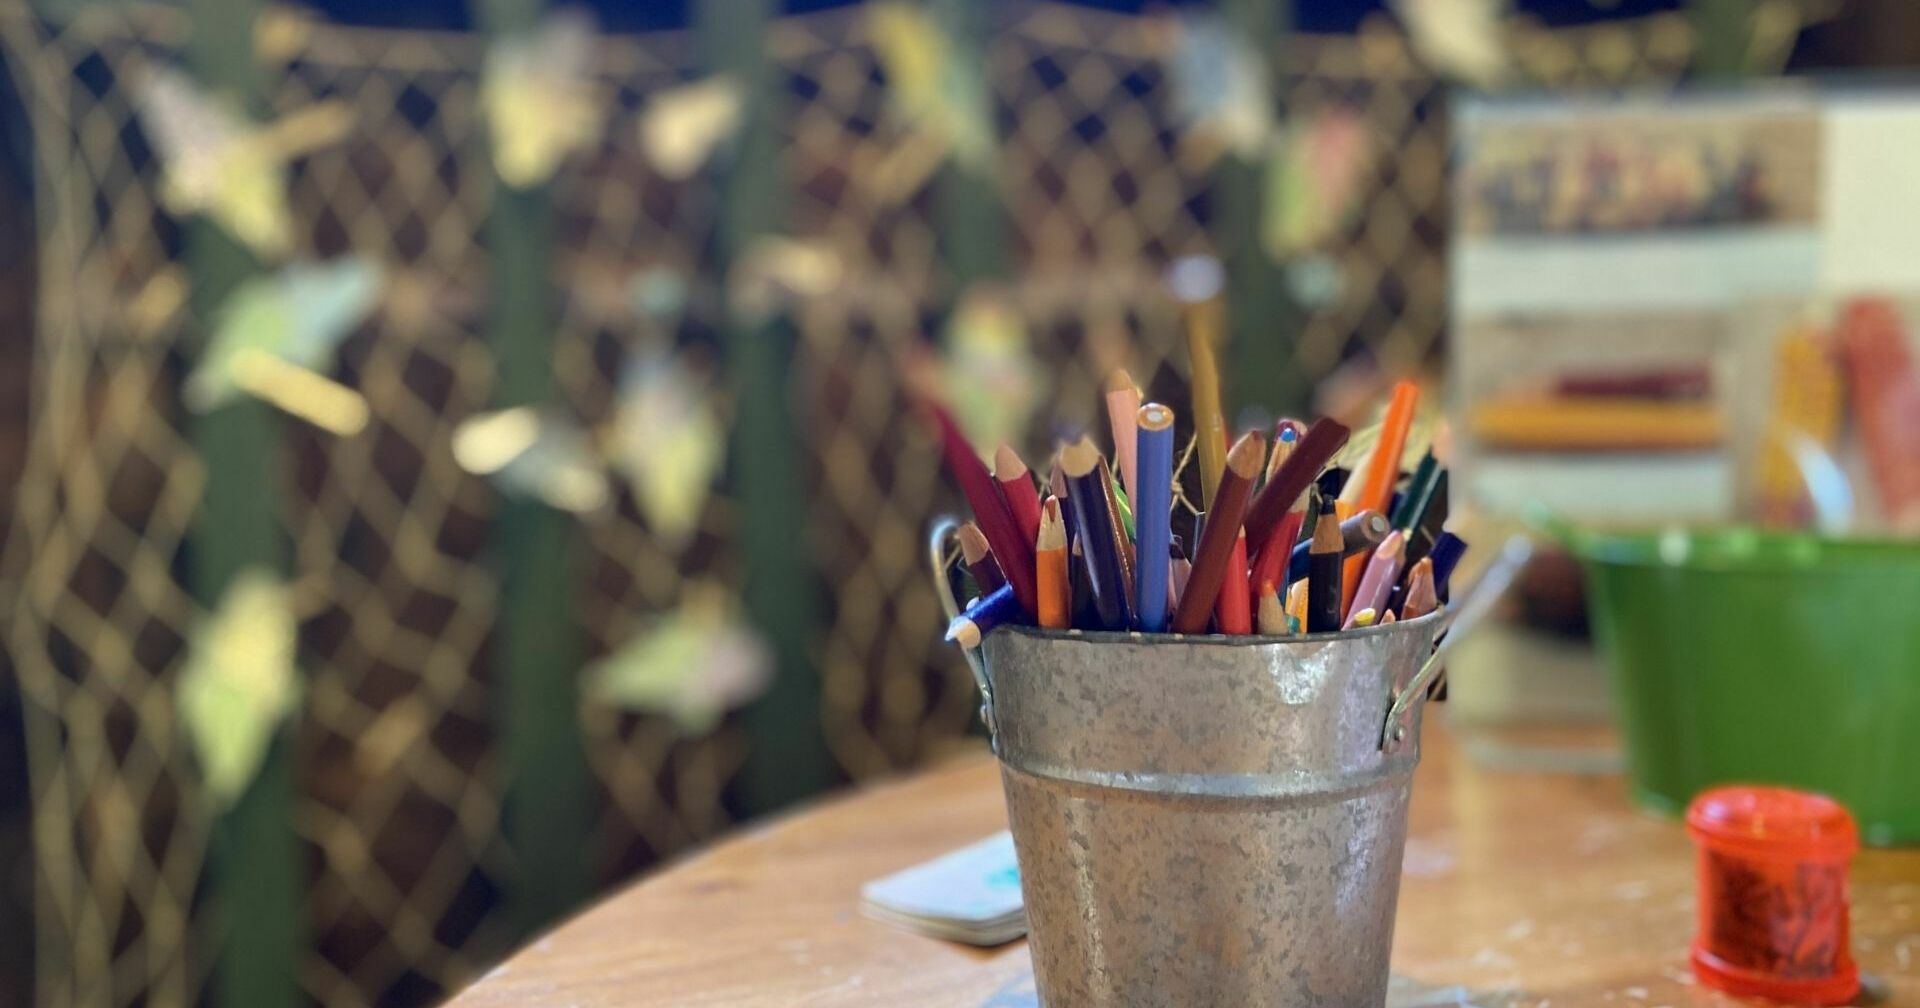 table with craft supplies including a silver bucket filled with colored pencils